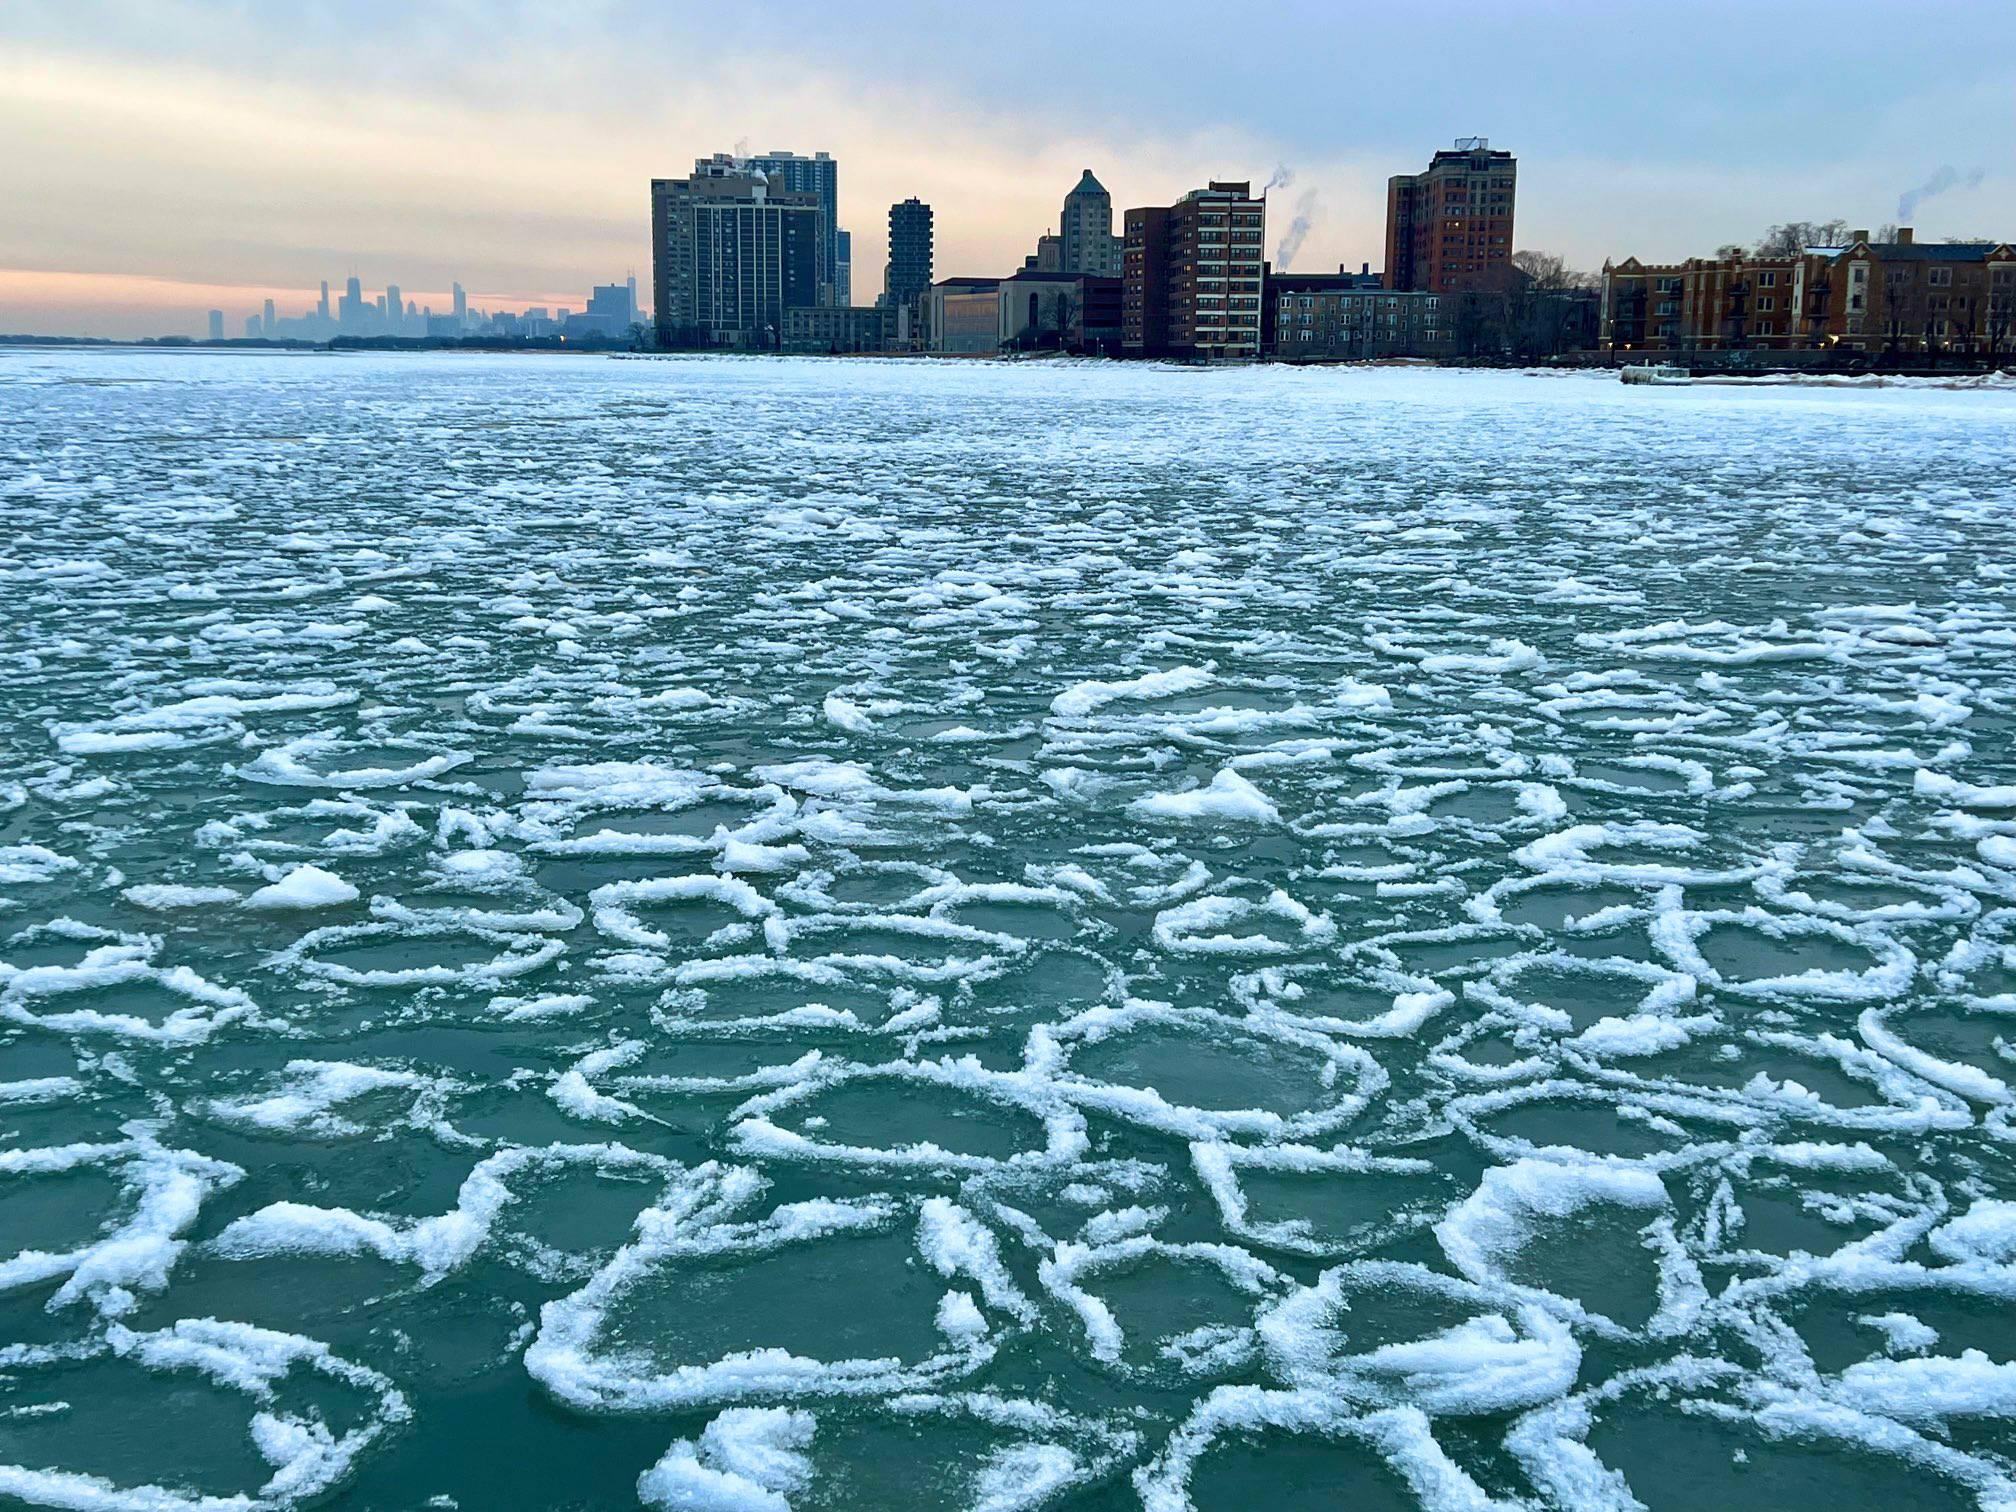 Ice formations in Lake Michigan in Chicago taken by Sharan Banagiri. He told CNN these photos were taken at Loyola Beach at Rogers Park, which is about 10 miles north of downtown Chicago. (Credit: Sharan Banagiri)